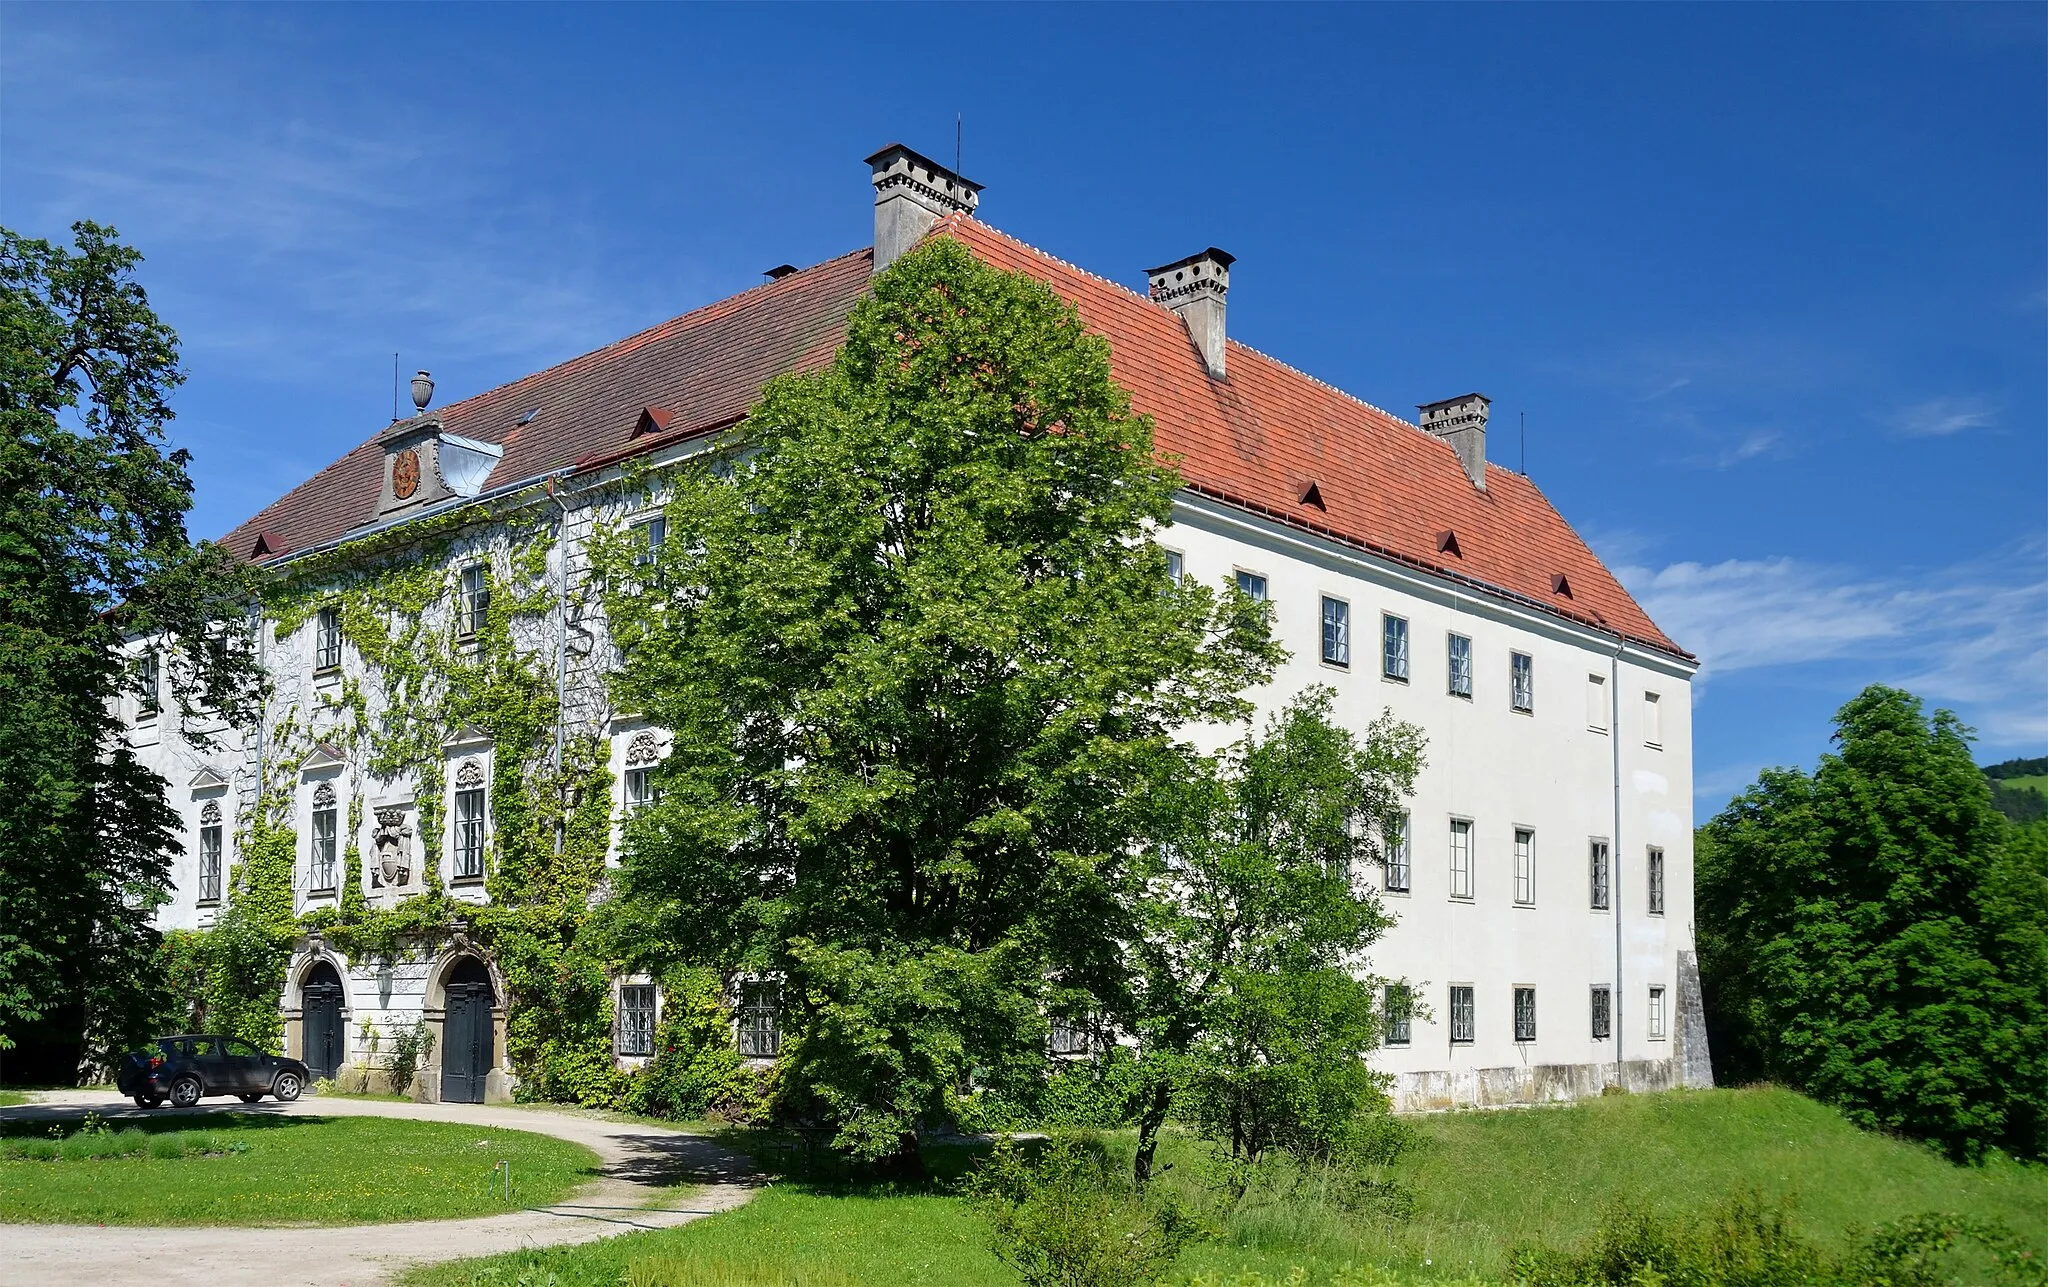 Photo showing: The castle Stiebar in Gresten, Lower Austria, is protected as a cultural heritage monument.